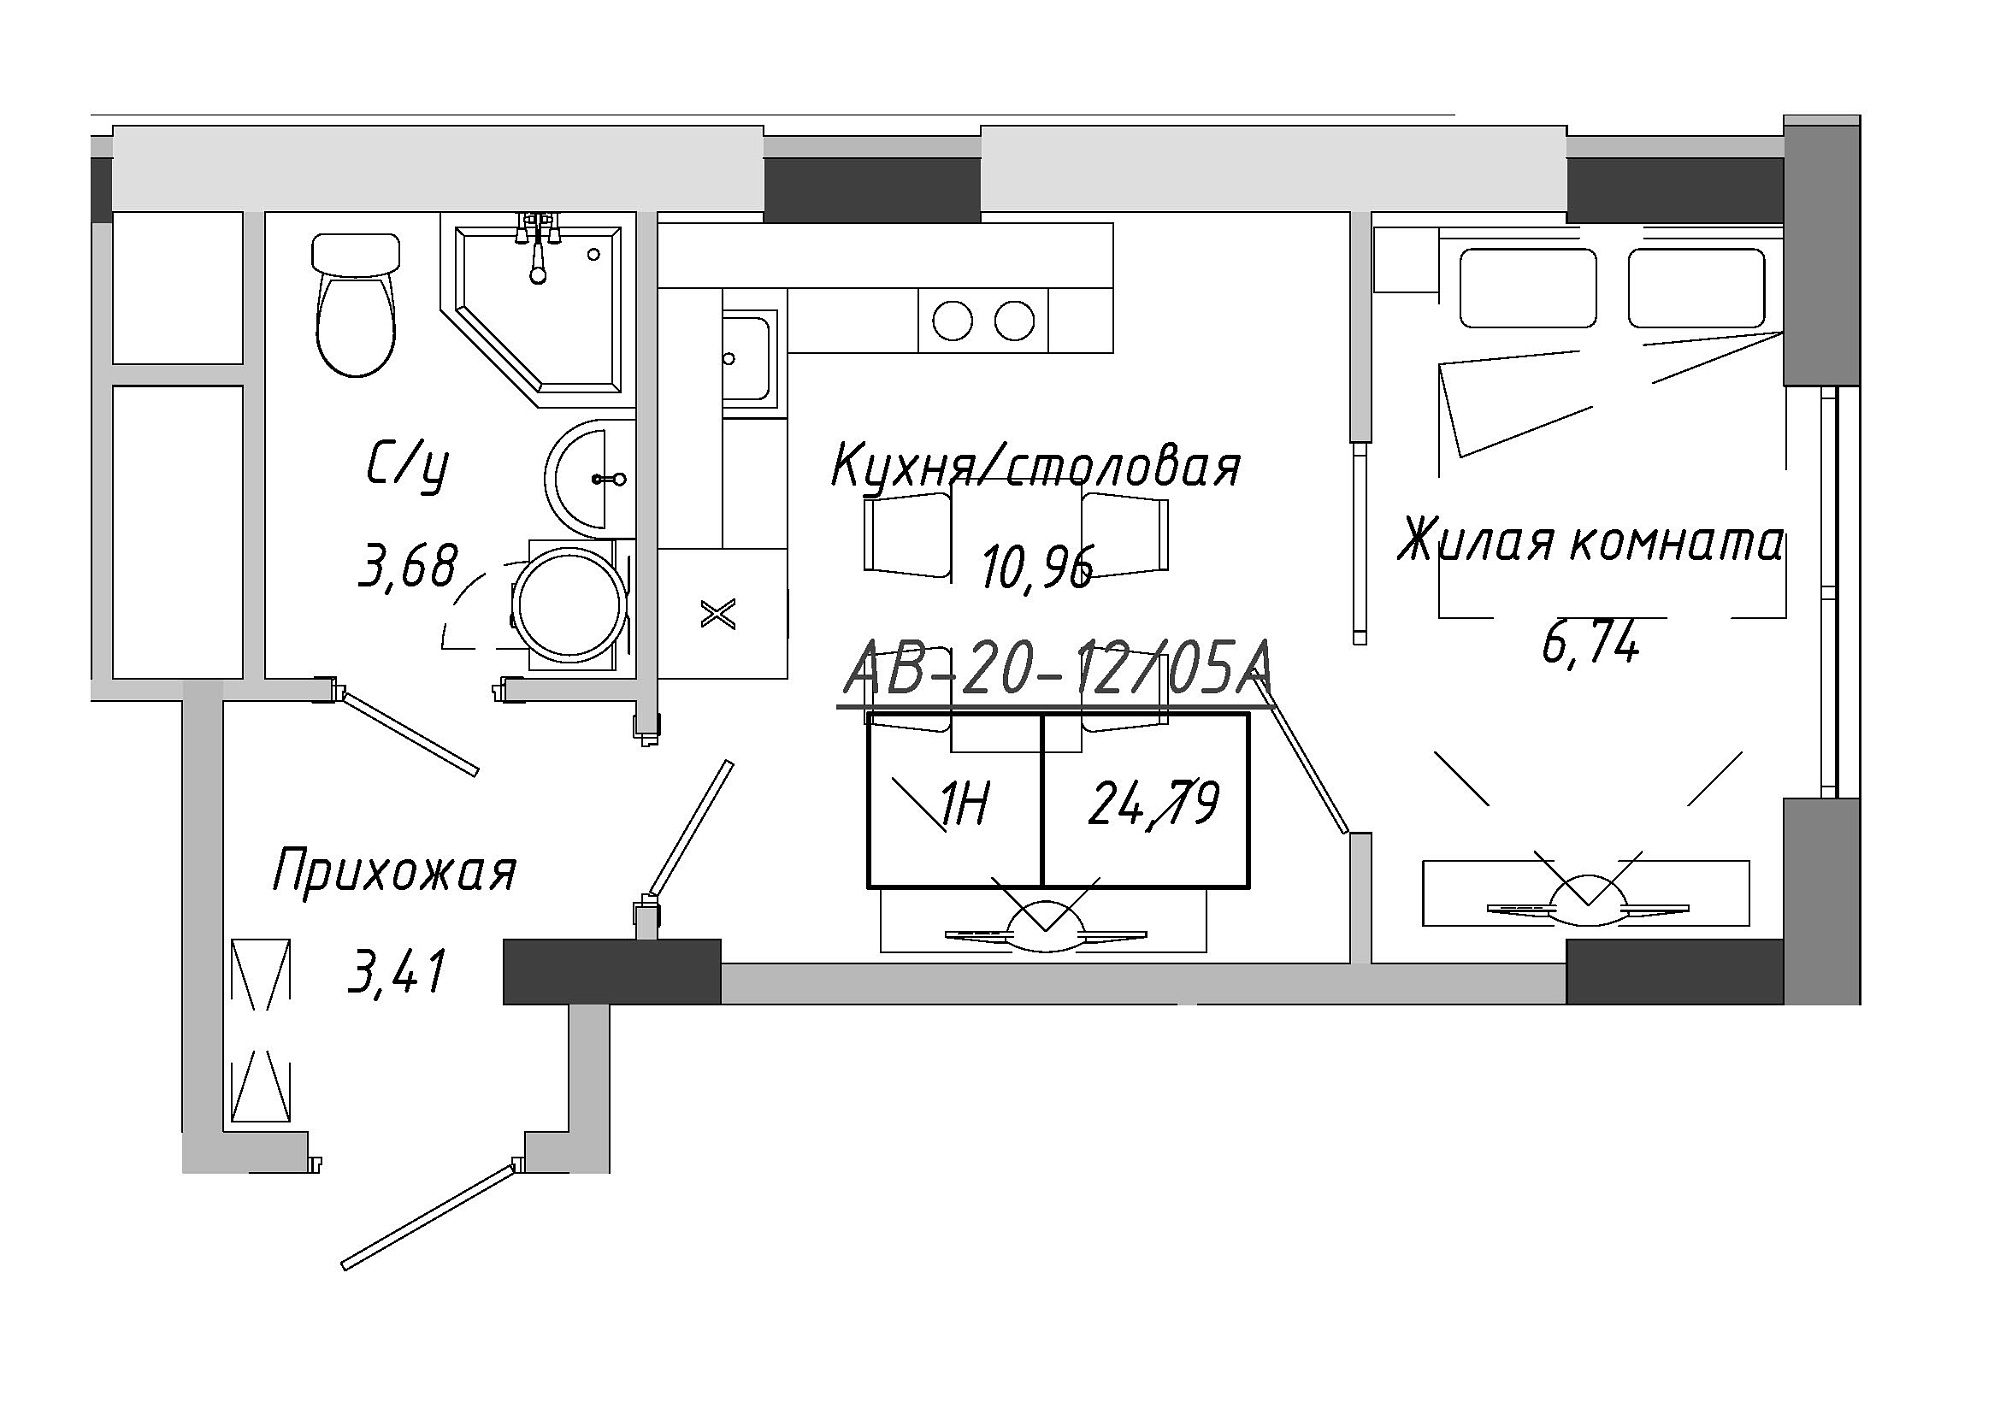 Planning 1-rm flats area 24.41m2, AB-20-12/0005а.